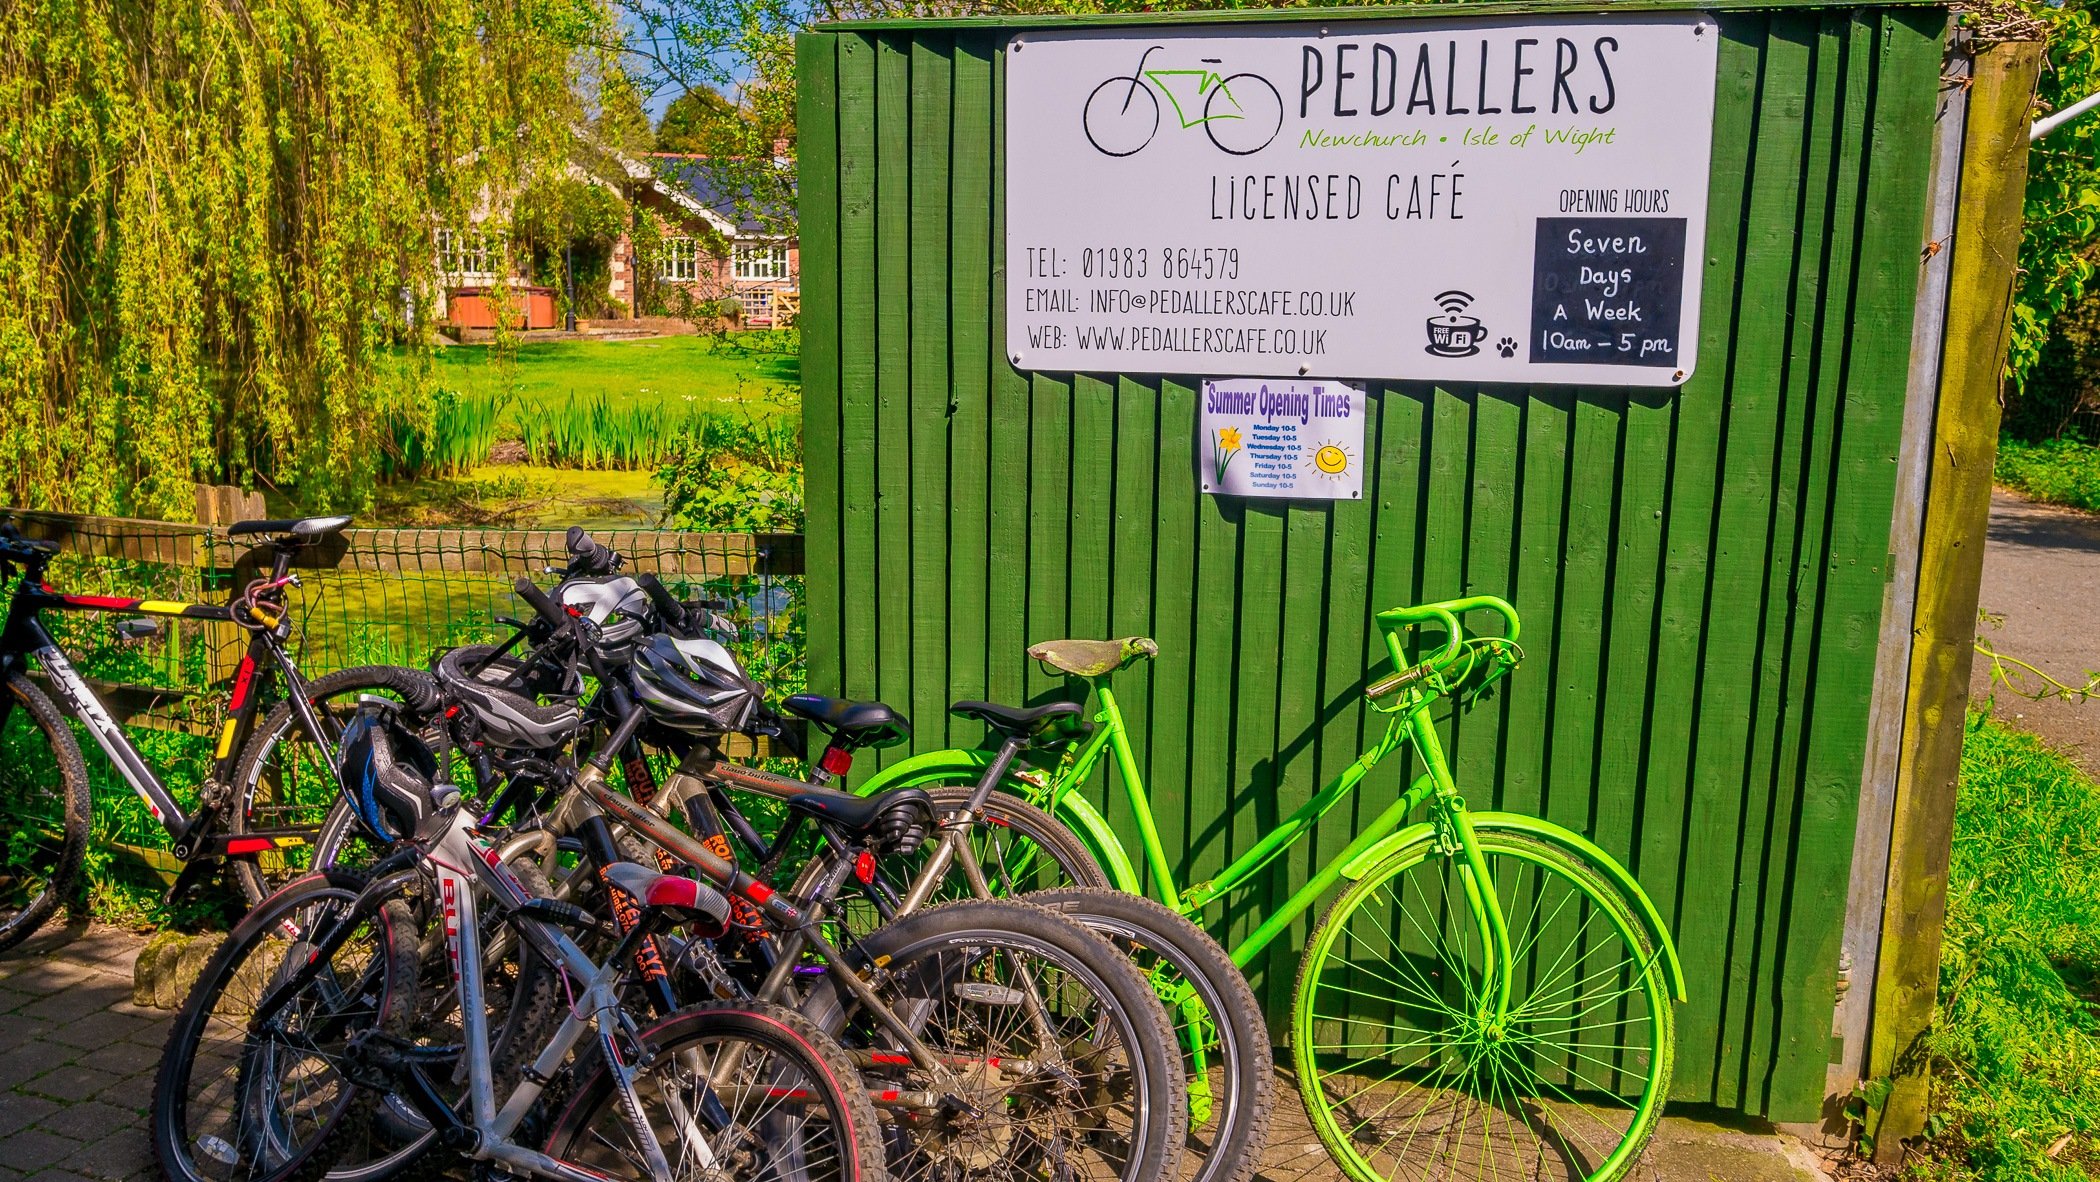 Stopping at the Pedallers Cafe